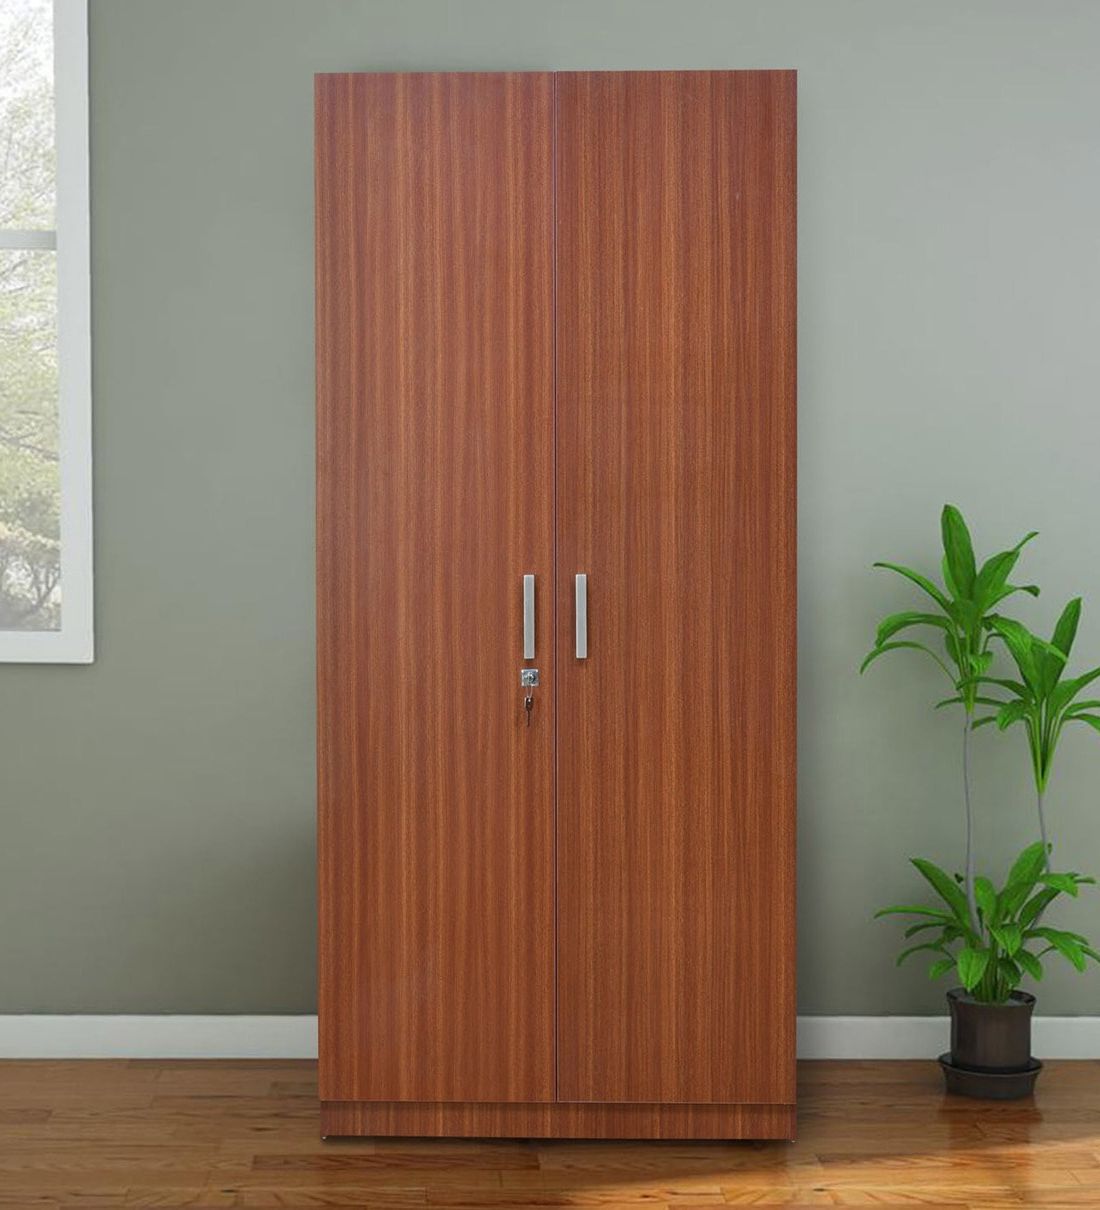 [%buy Amelia 2 Door Wardrobe In Espresso Colour At 64% Off@home |  Pepperfry Within Well Known Espresso Wardrobes|espresso Wardrobes Inside Most Up To Date Buy Amelia 2 Door Wardrobe In Espresso Colour At 64% Off@home |  Pepperfry|most Recent Espresso Wardrobes With Regard To Buy Amelia 2 Door Wardrobe In Espresso Colour At 64% Off@home |  Pepperfry|well Liked Buy Amelia 2 Door Wardrobe In Espresso Colour At 64% Off@home |  Pepperfry In Espresso Wardrobes%] (View 9 of 10)